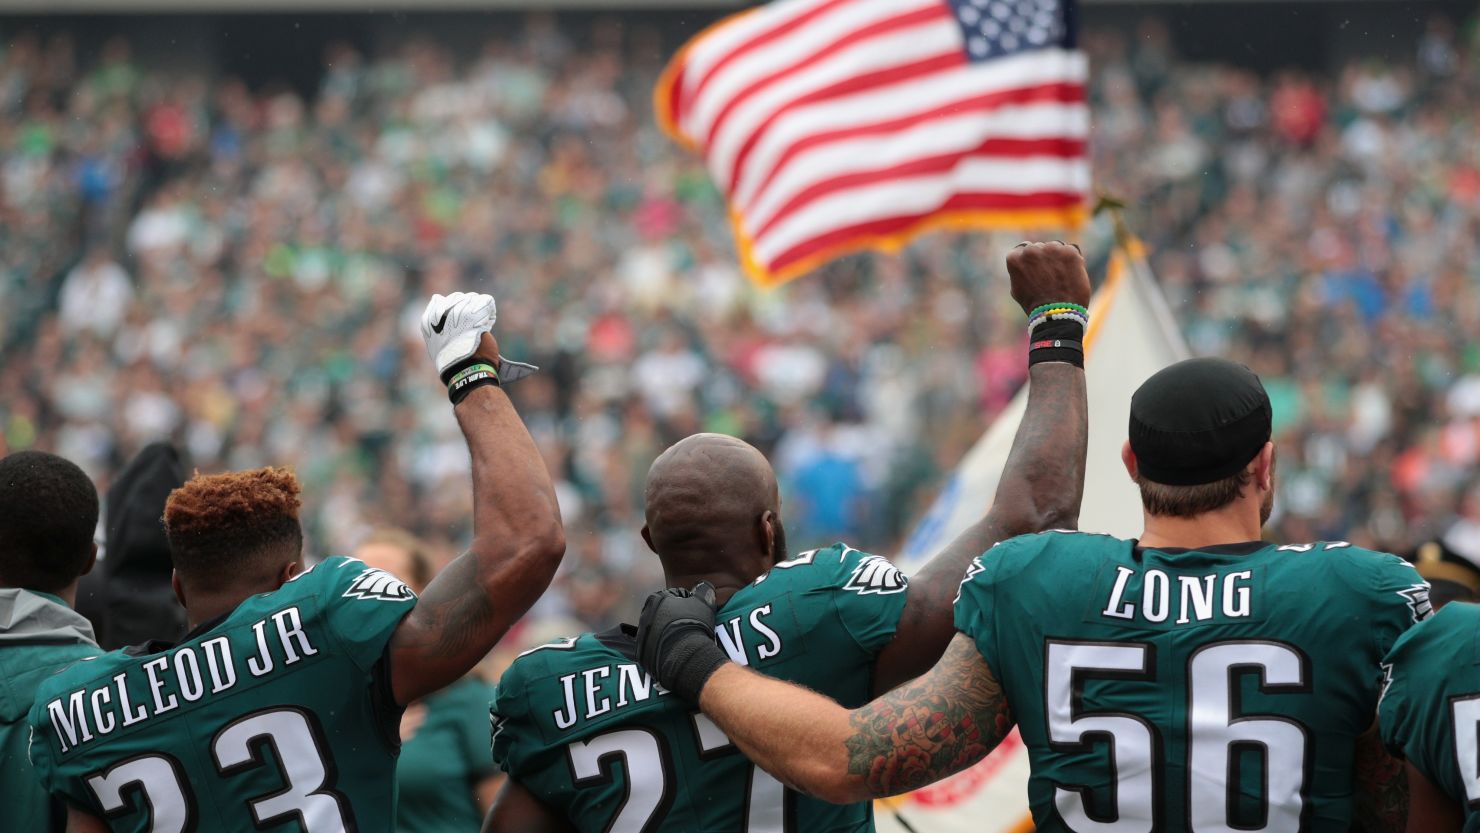 Chris Long (#56) shows solidarity with Philadelphia Eagles teammates Malcolm Jenkins (#27) and Rodney McLeod (#23) during the playing of the US national anthem on October 8, 2017 in Philadelphia. Two weeks earlier, President Donald Trump used a profanity to criticize protesting NFL players. 